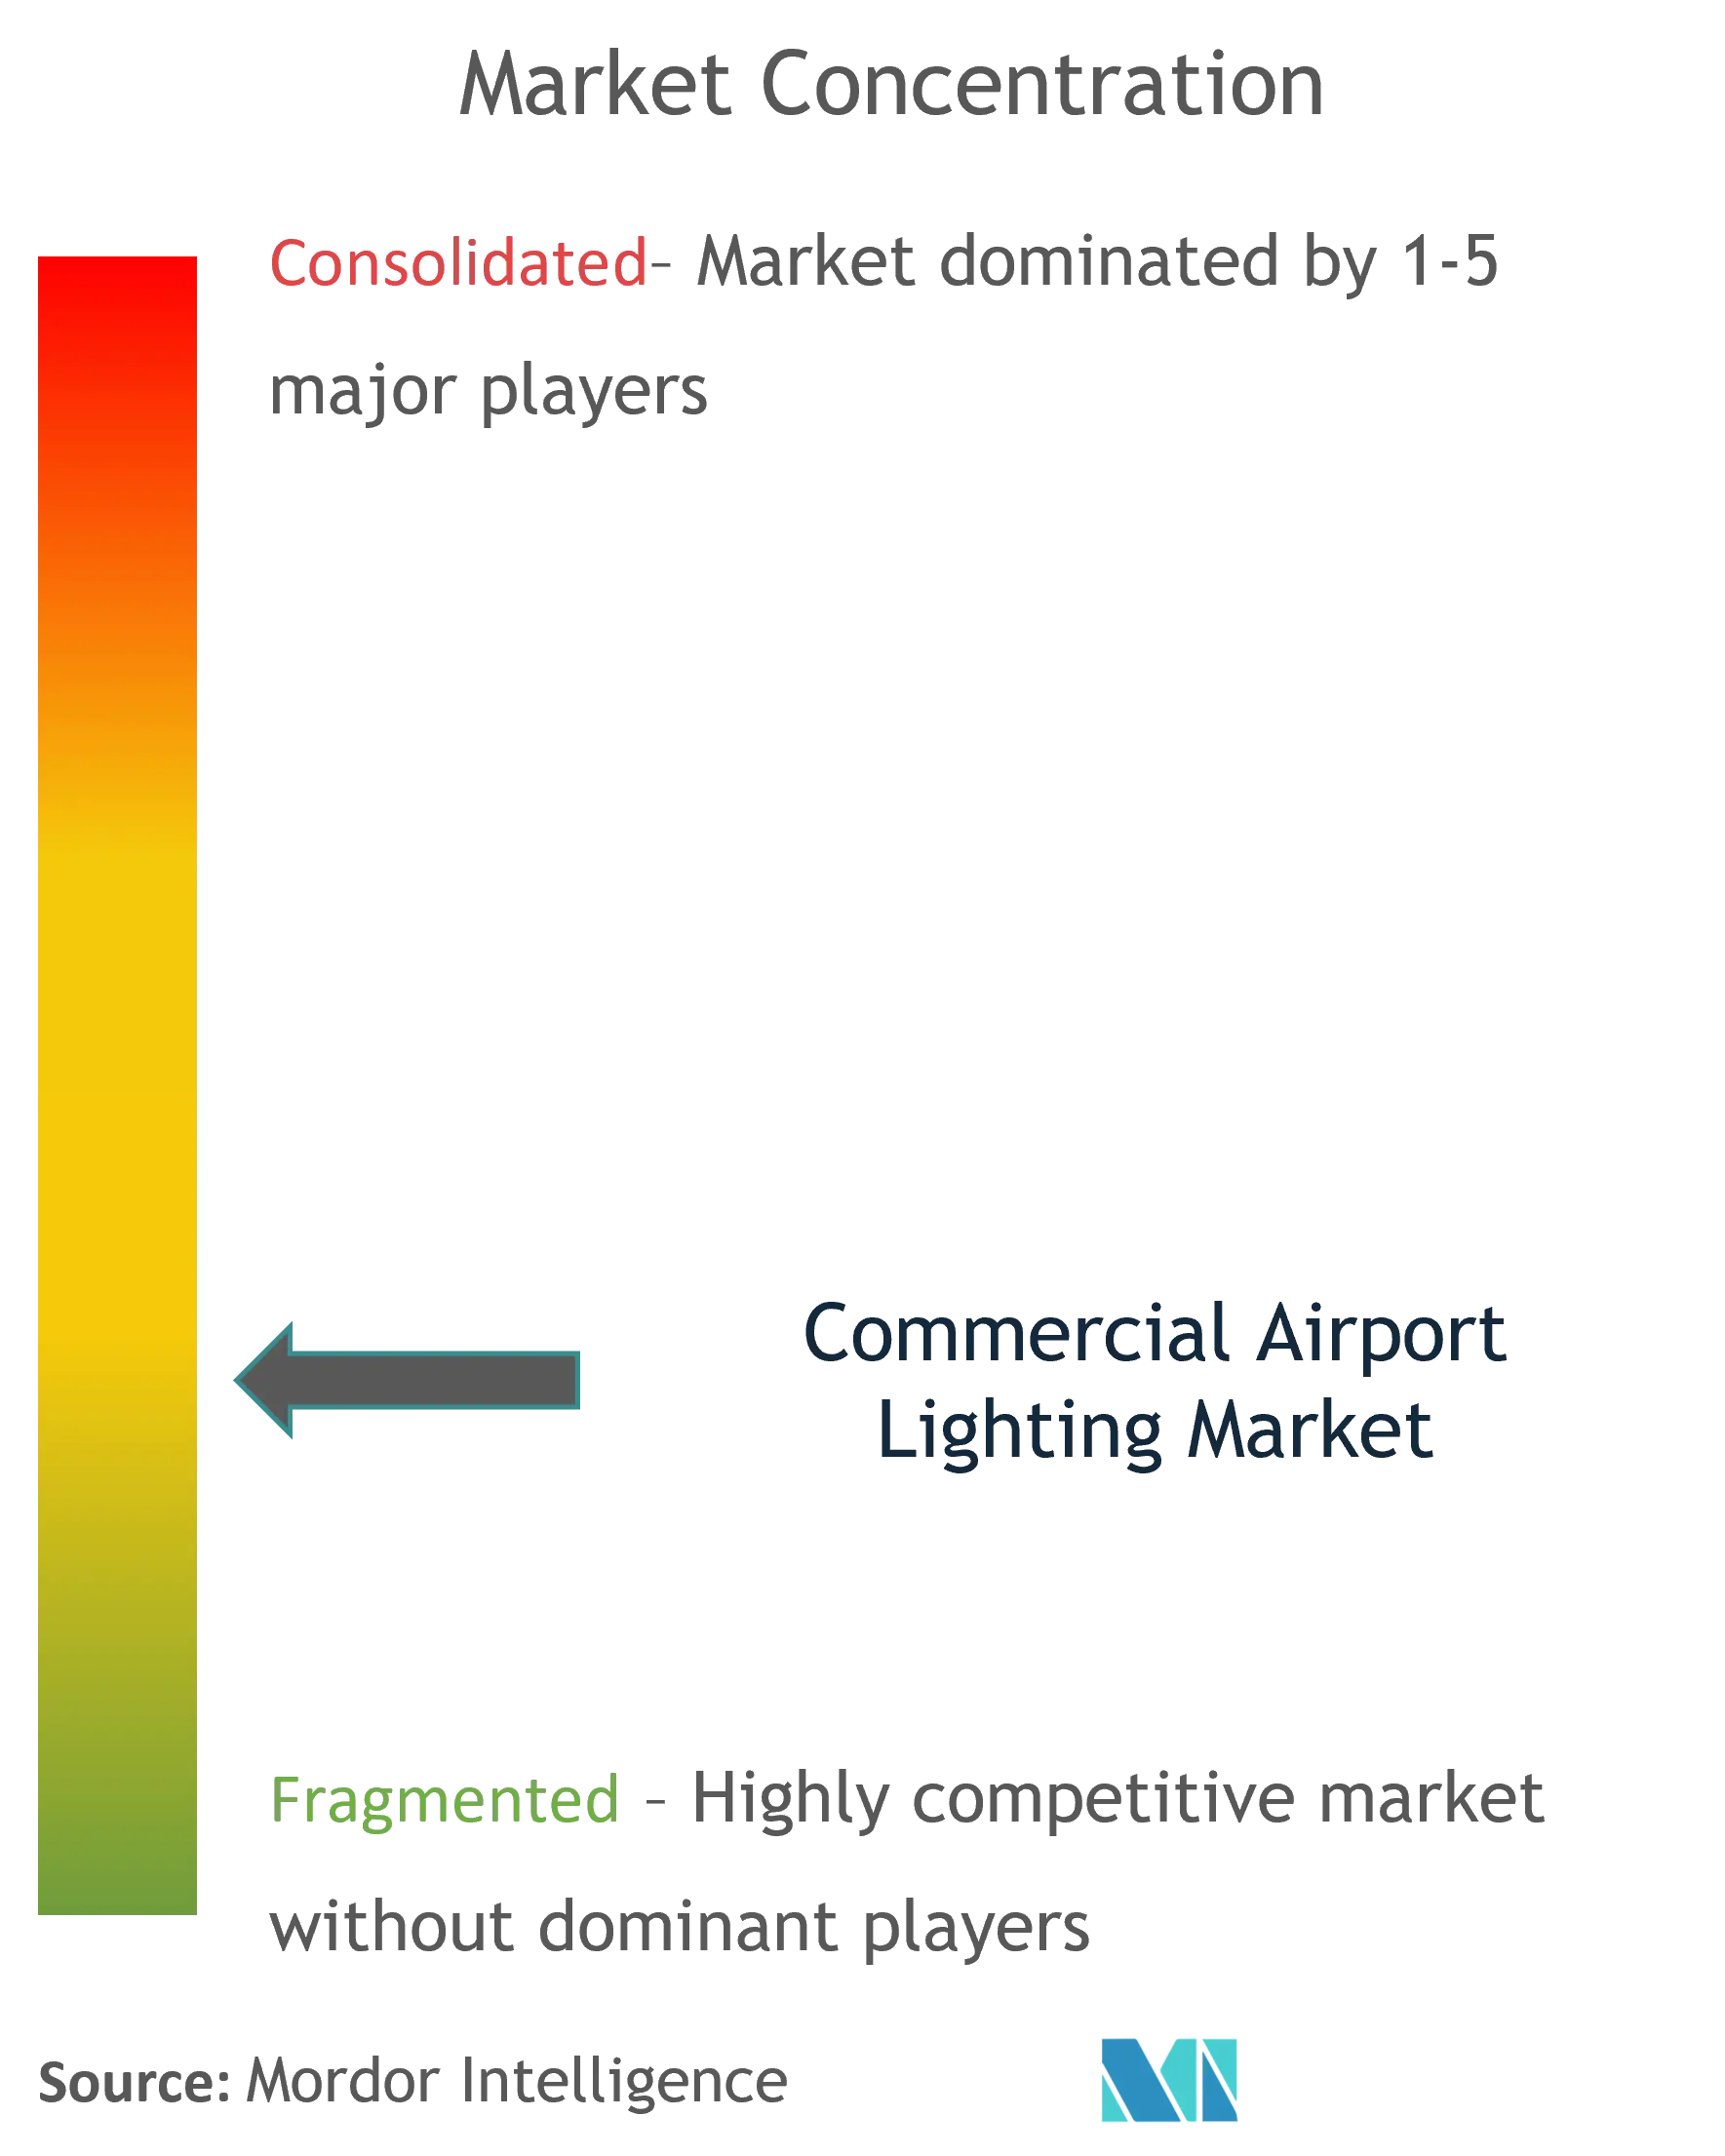 Global Commercial Airport Lighting Market Industry Concentration